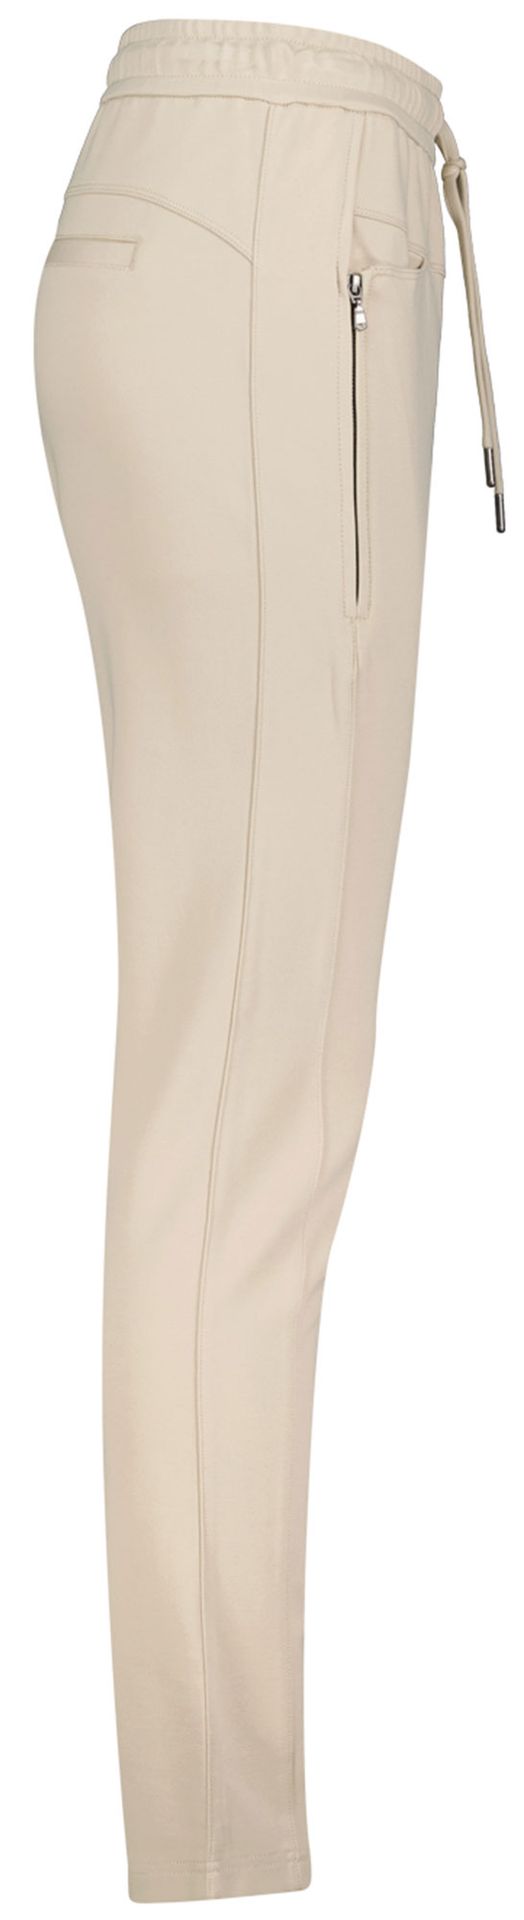 Red Button Red Button pantalon Tessy Beige 00074495-5200